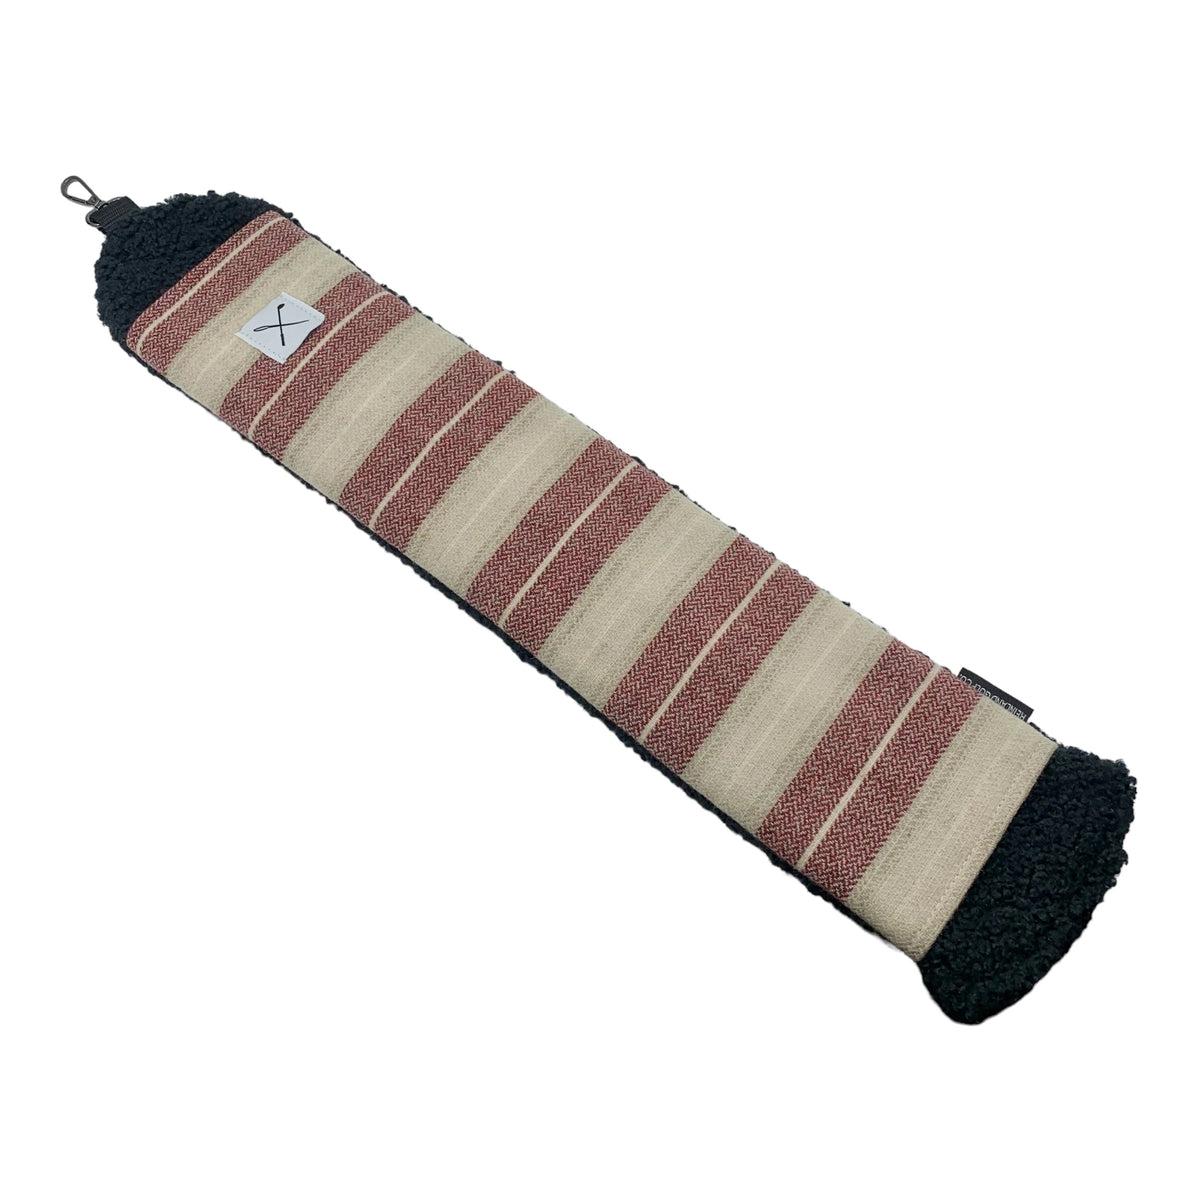 red and cream striped golf bag strap cover